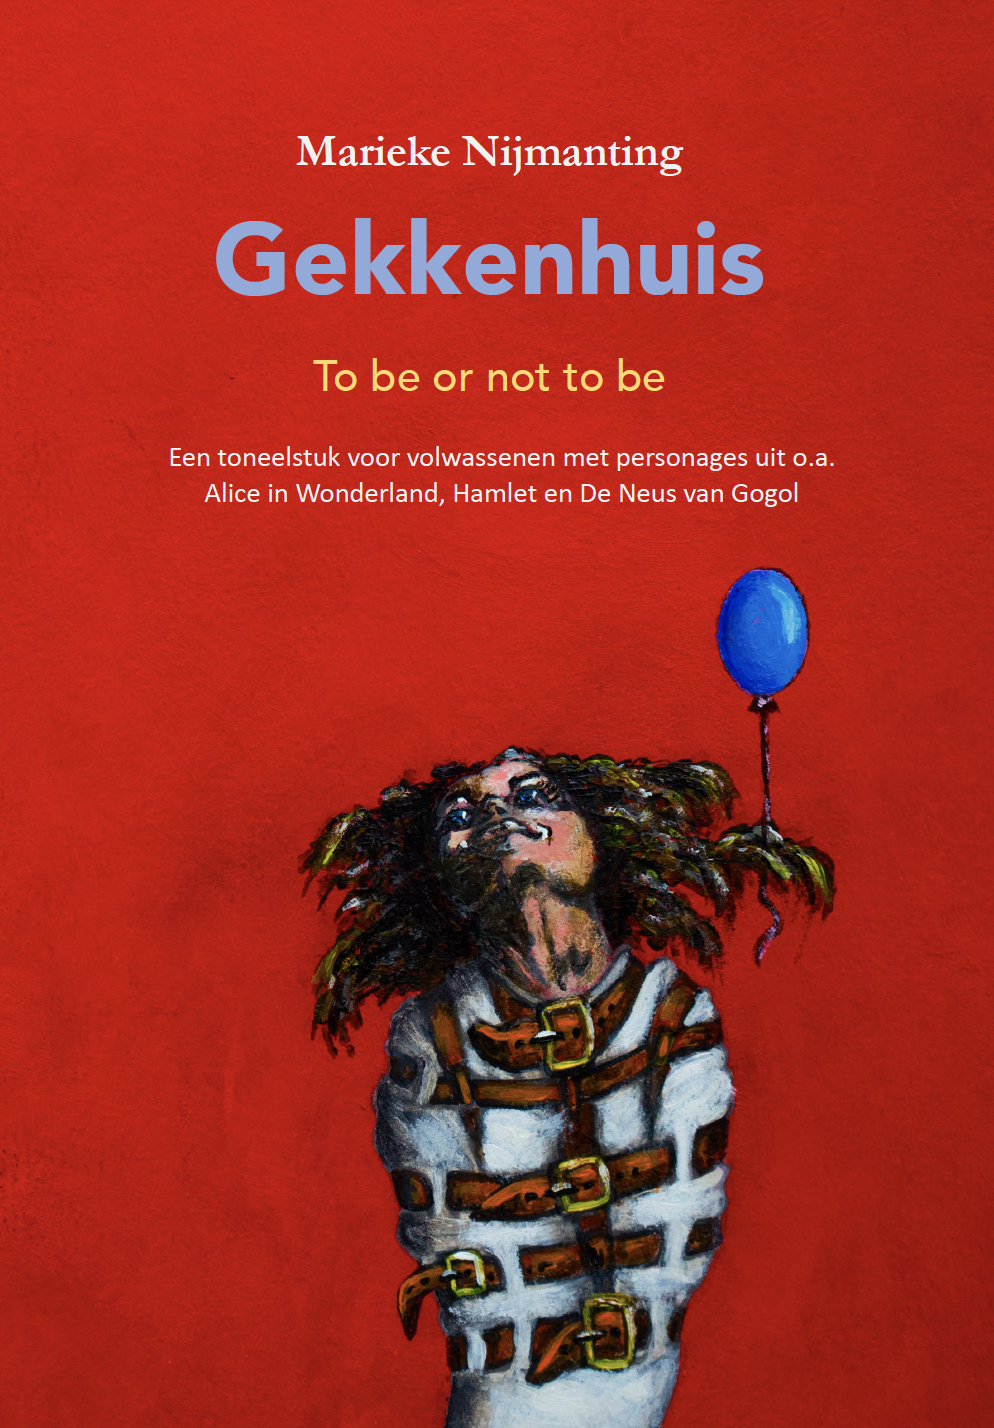 Gekkenhuis, to be or not to be